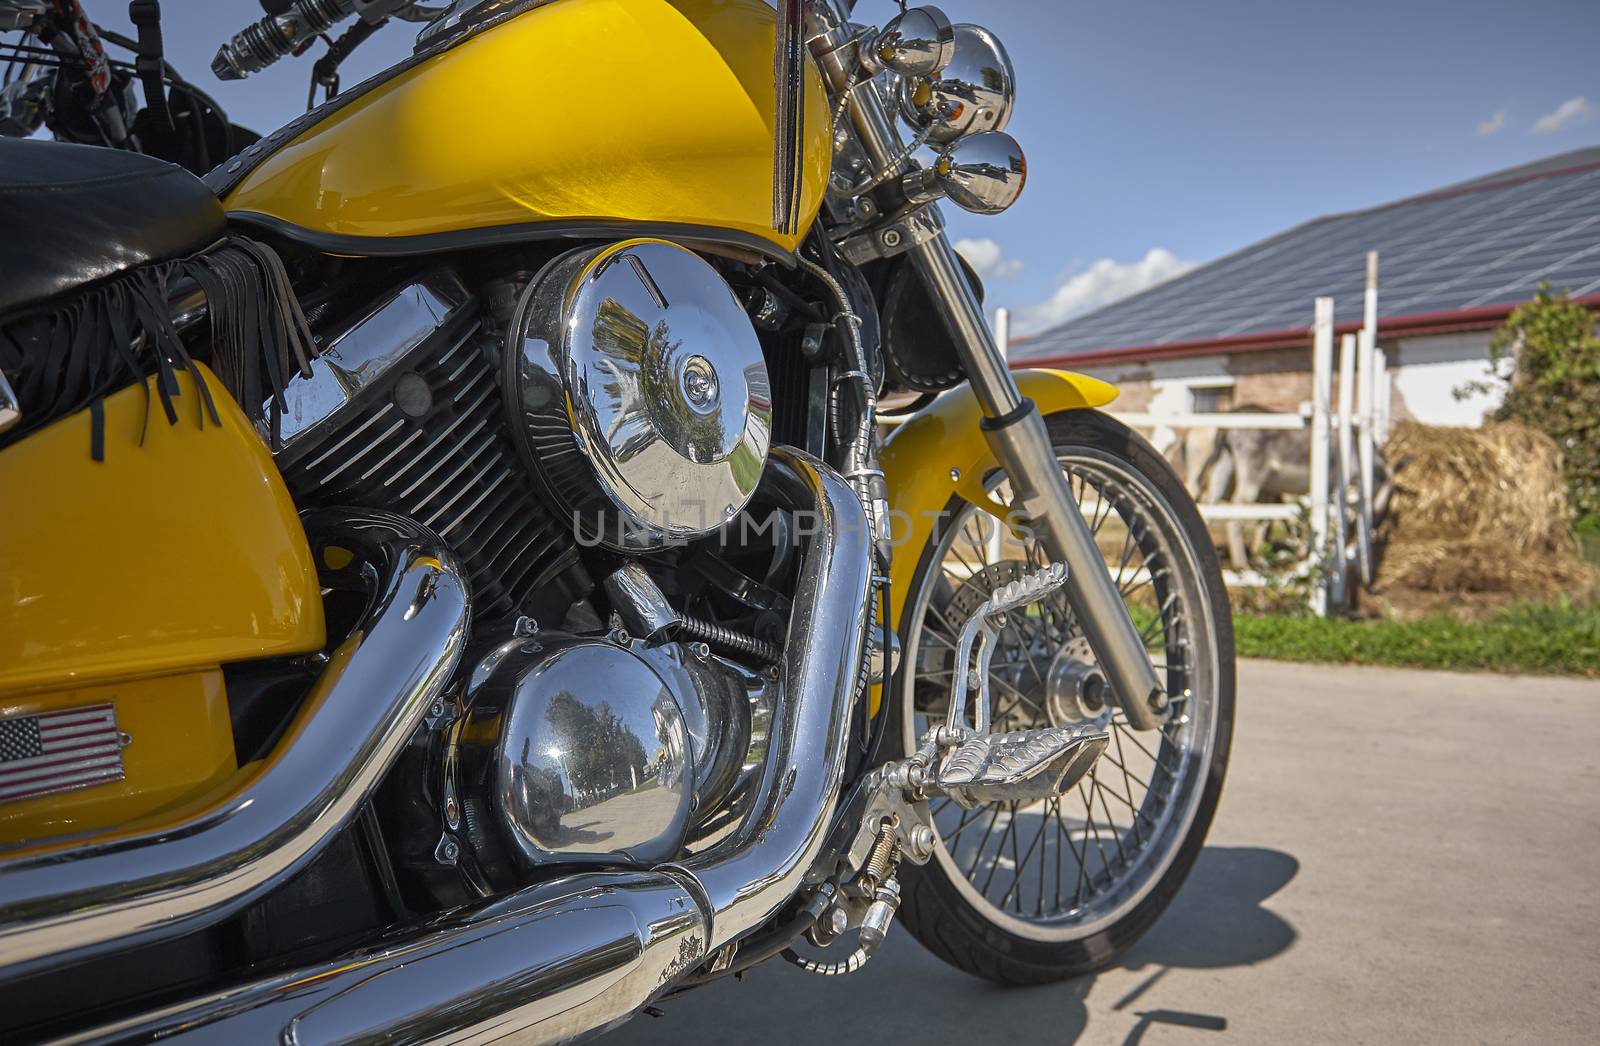 Customized yellow-colored motorcycle with chrome-plated parkings in a countryside landscape during an outdoor voyage.